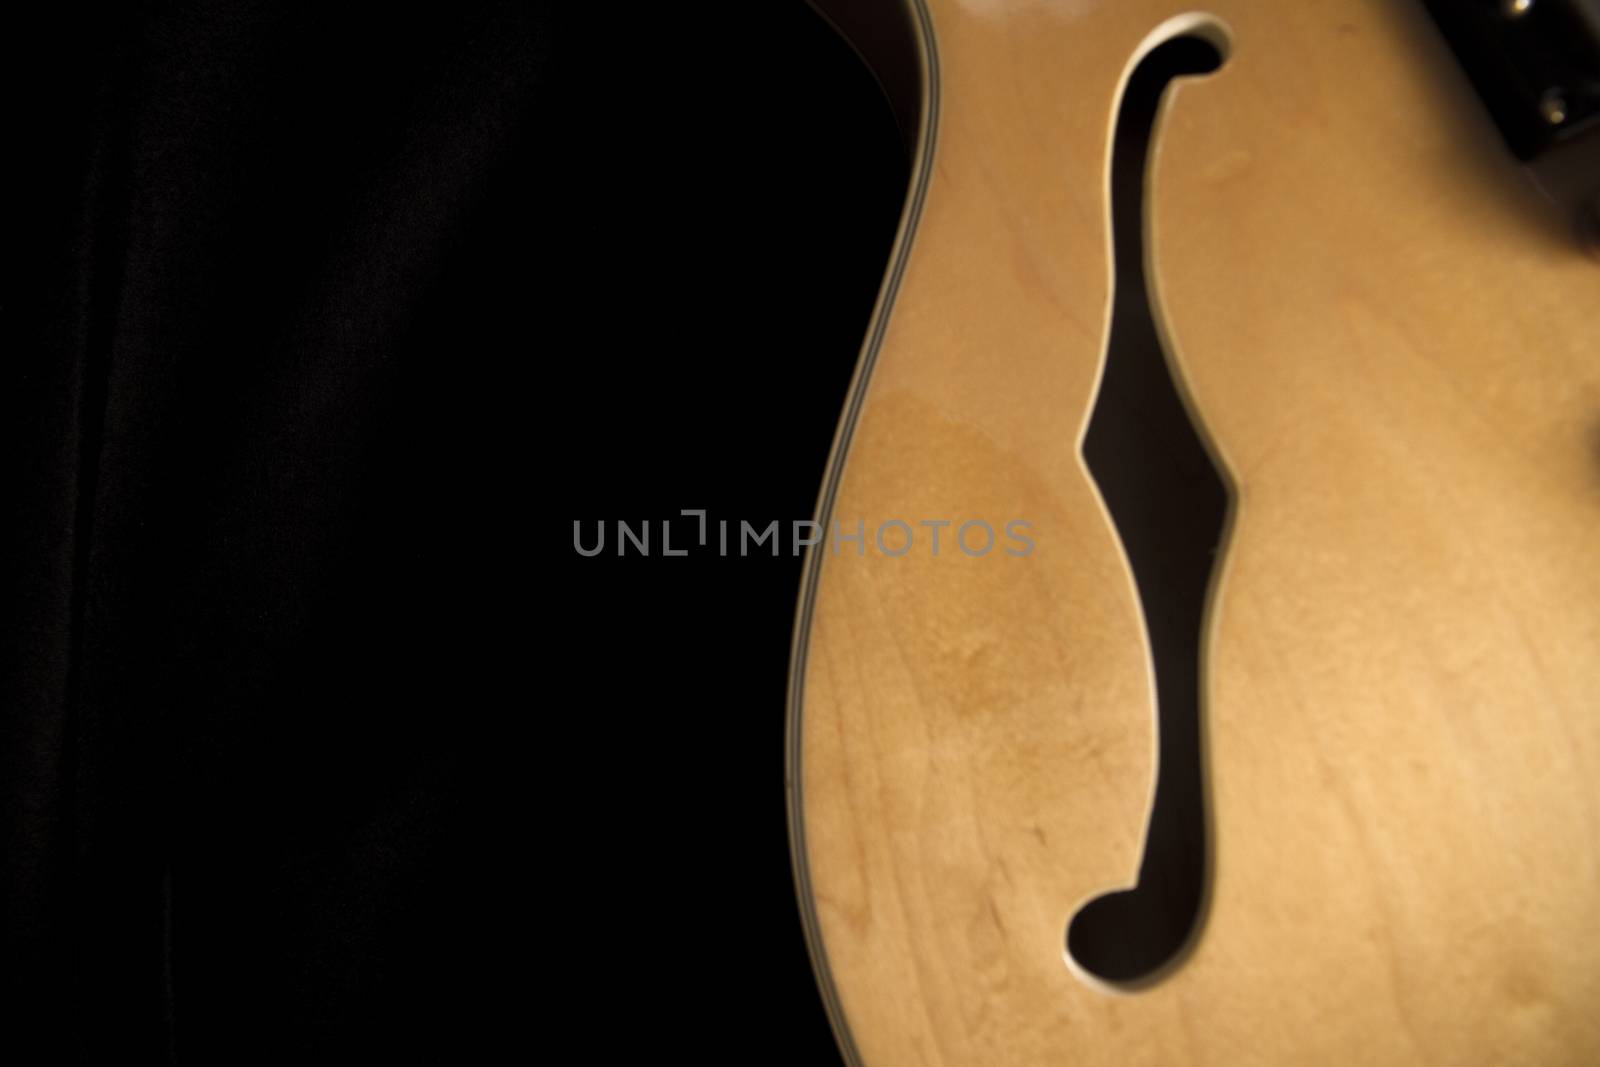 Vintage archtop guitar in natural maple close-up from above on black background, F-hole detail